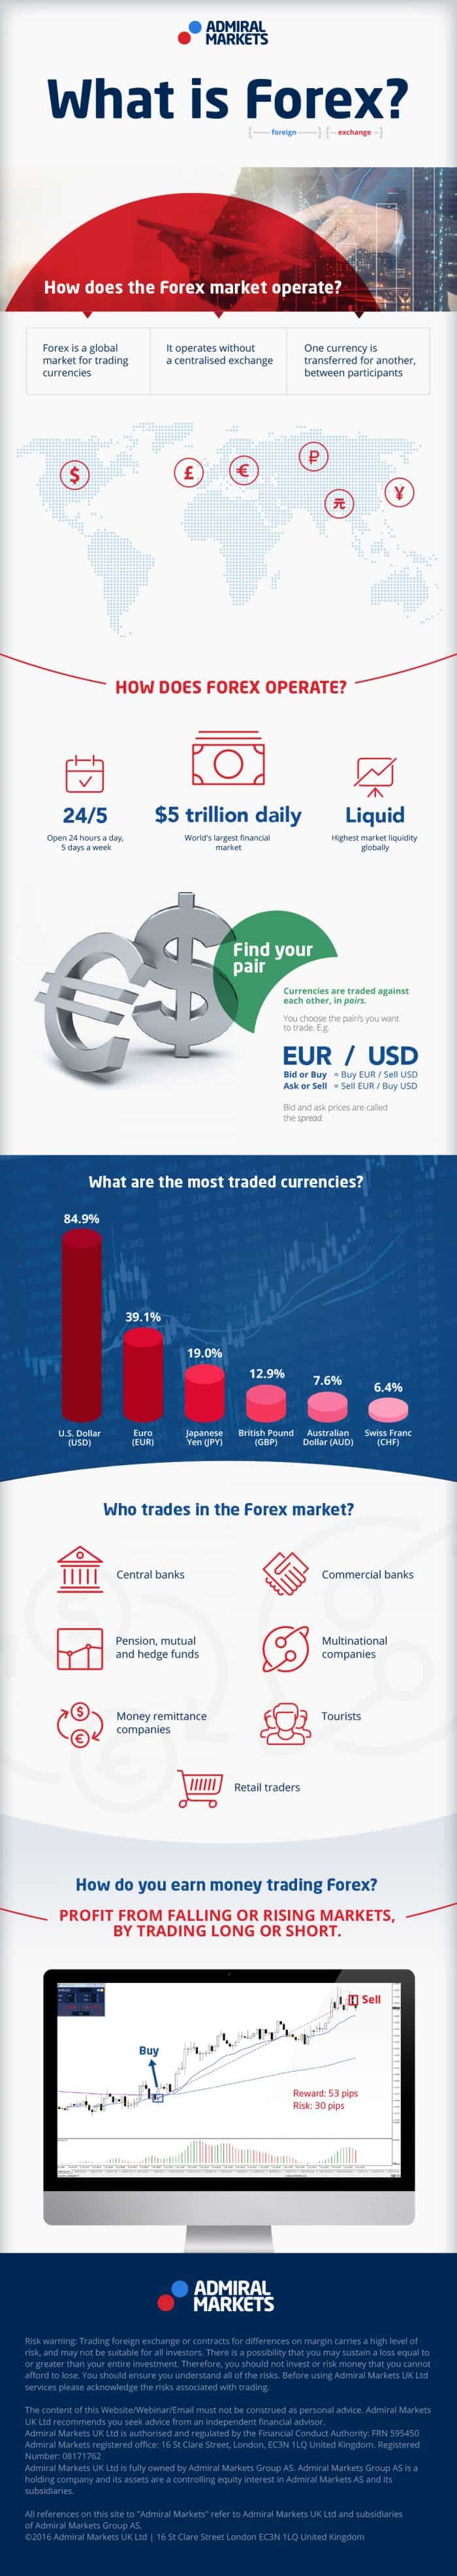 What is forex infographic